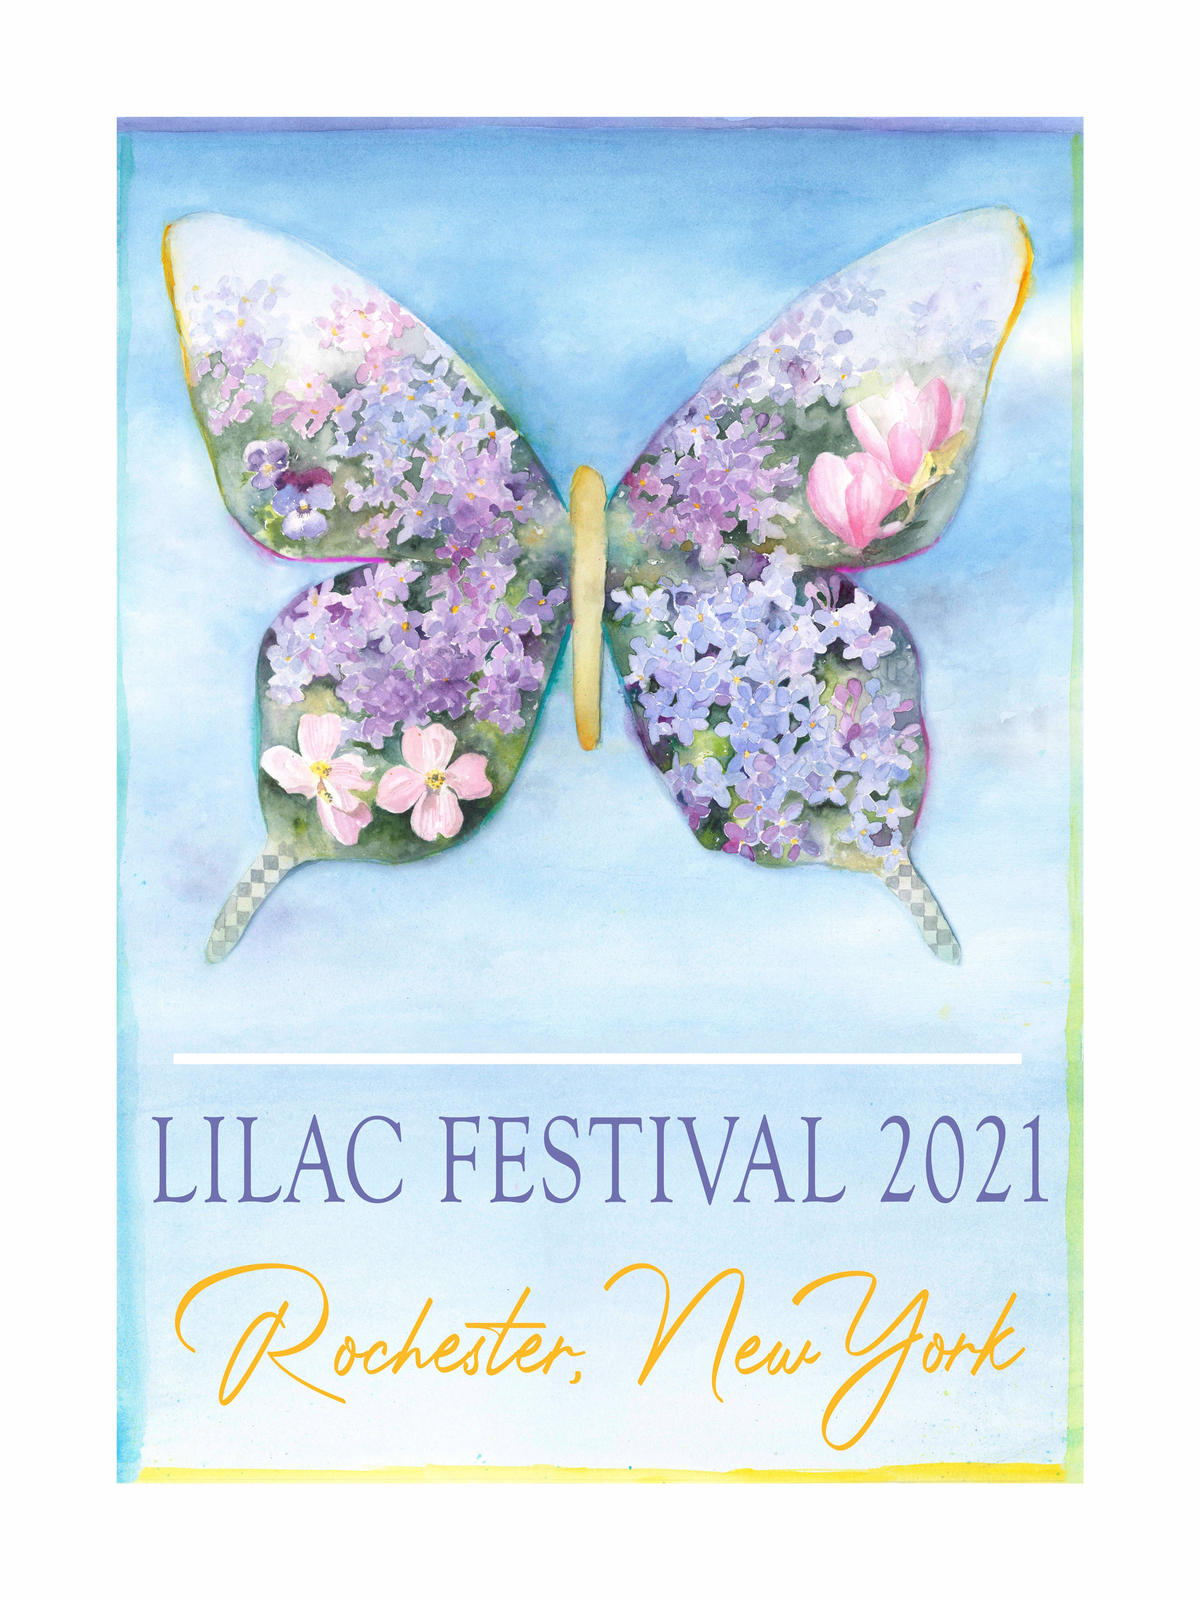 A very different Lilac Festival is around the corner WXXI News